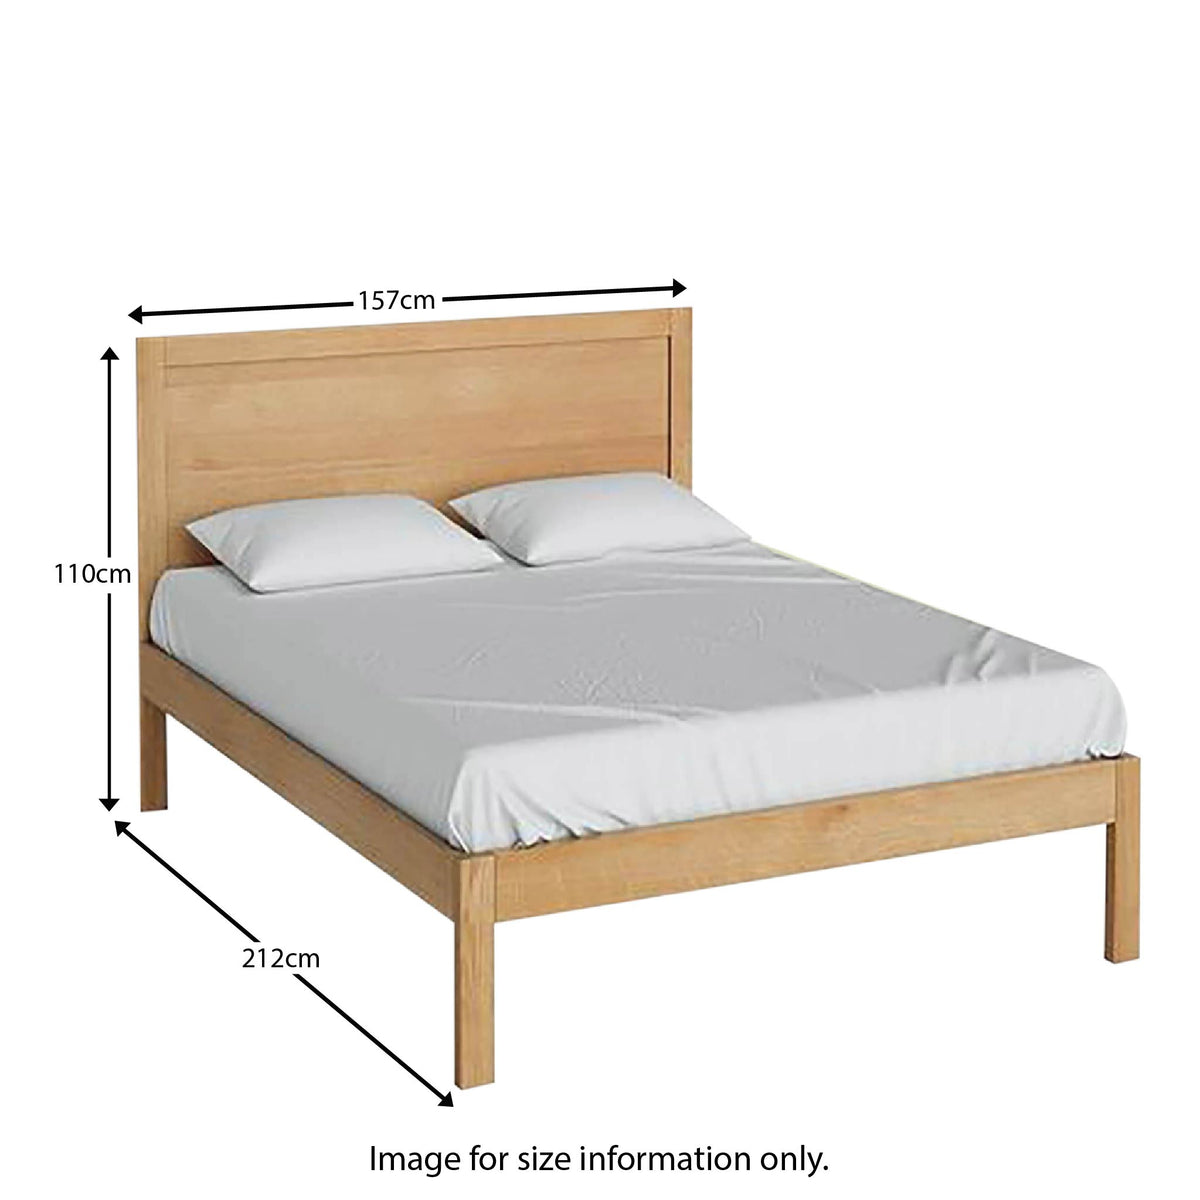 Surrey Oak / Abbey Waxed 5ft King Size Bed Frame dimensions